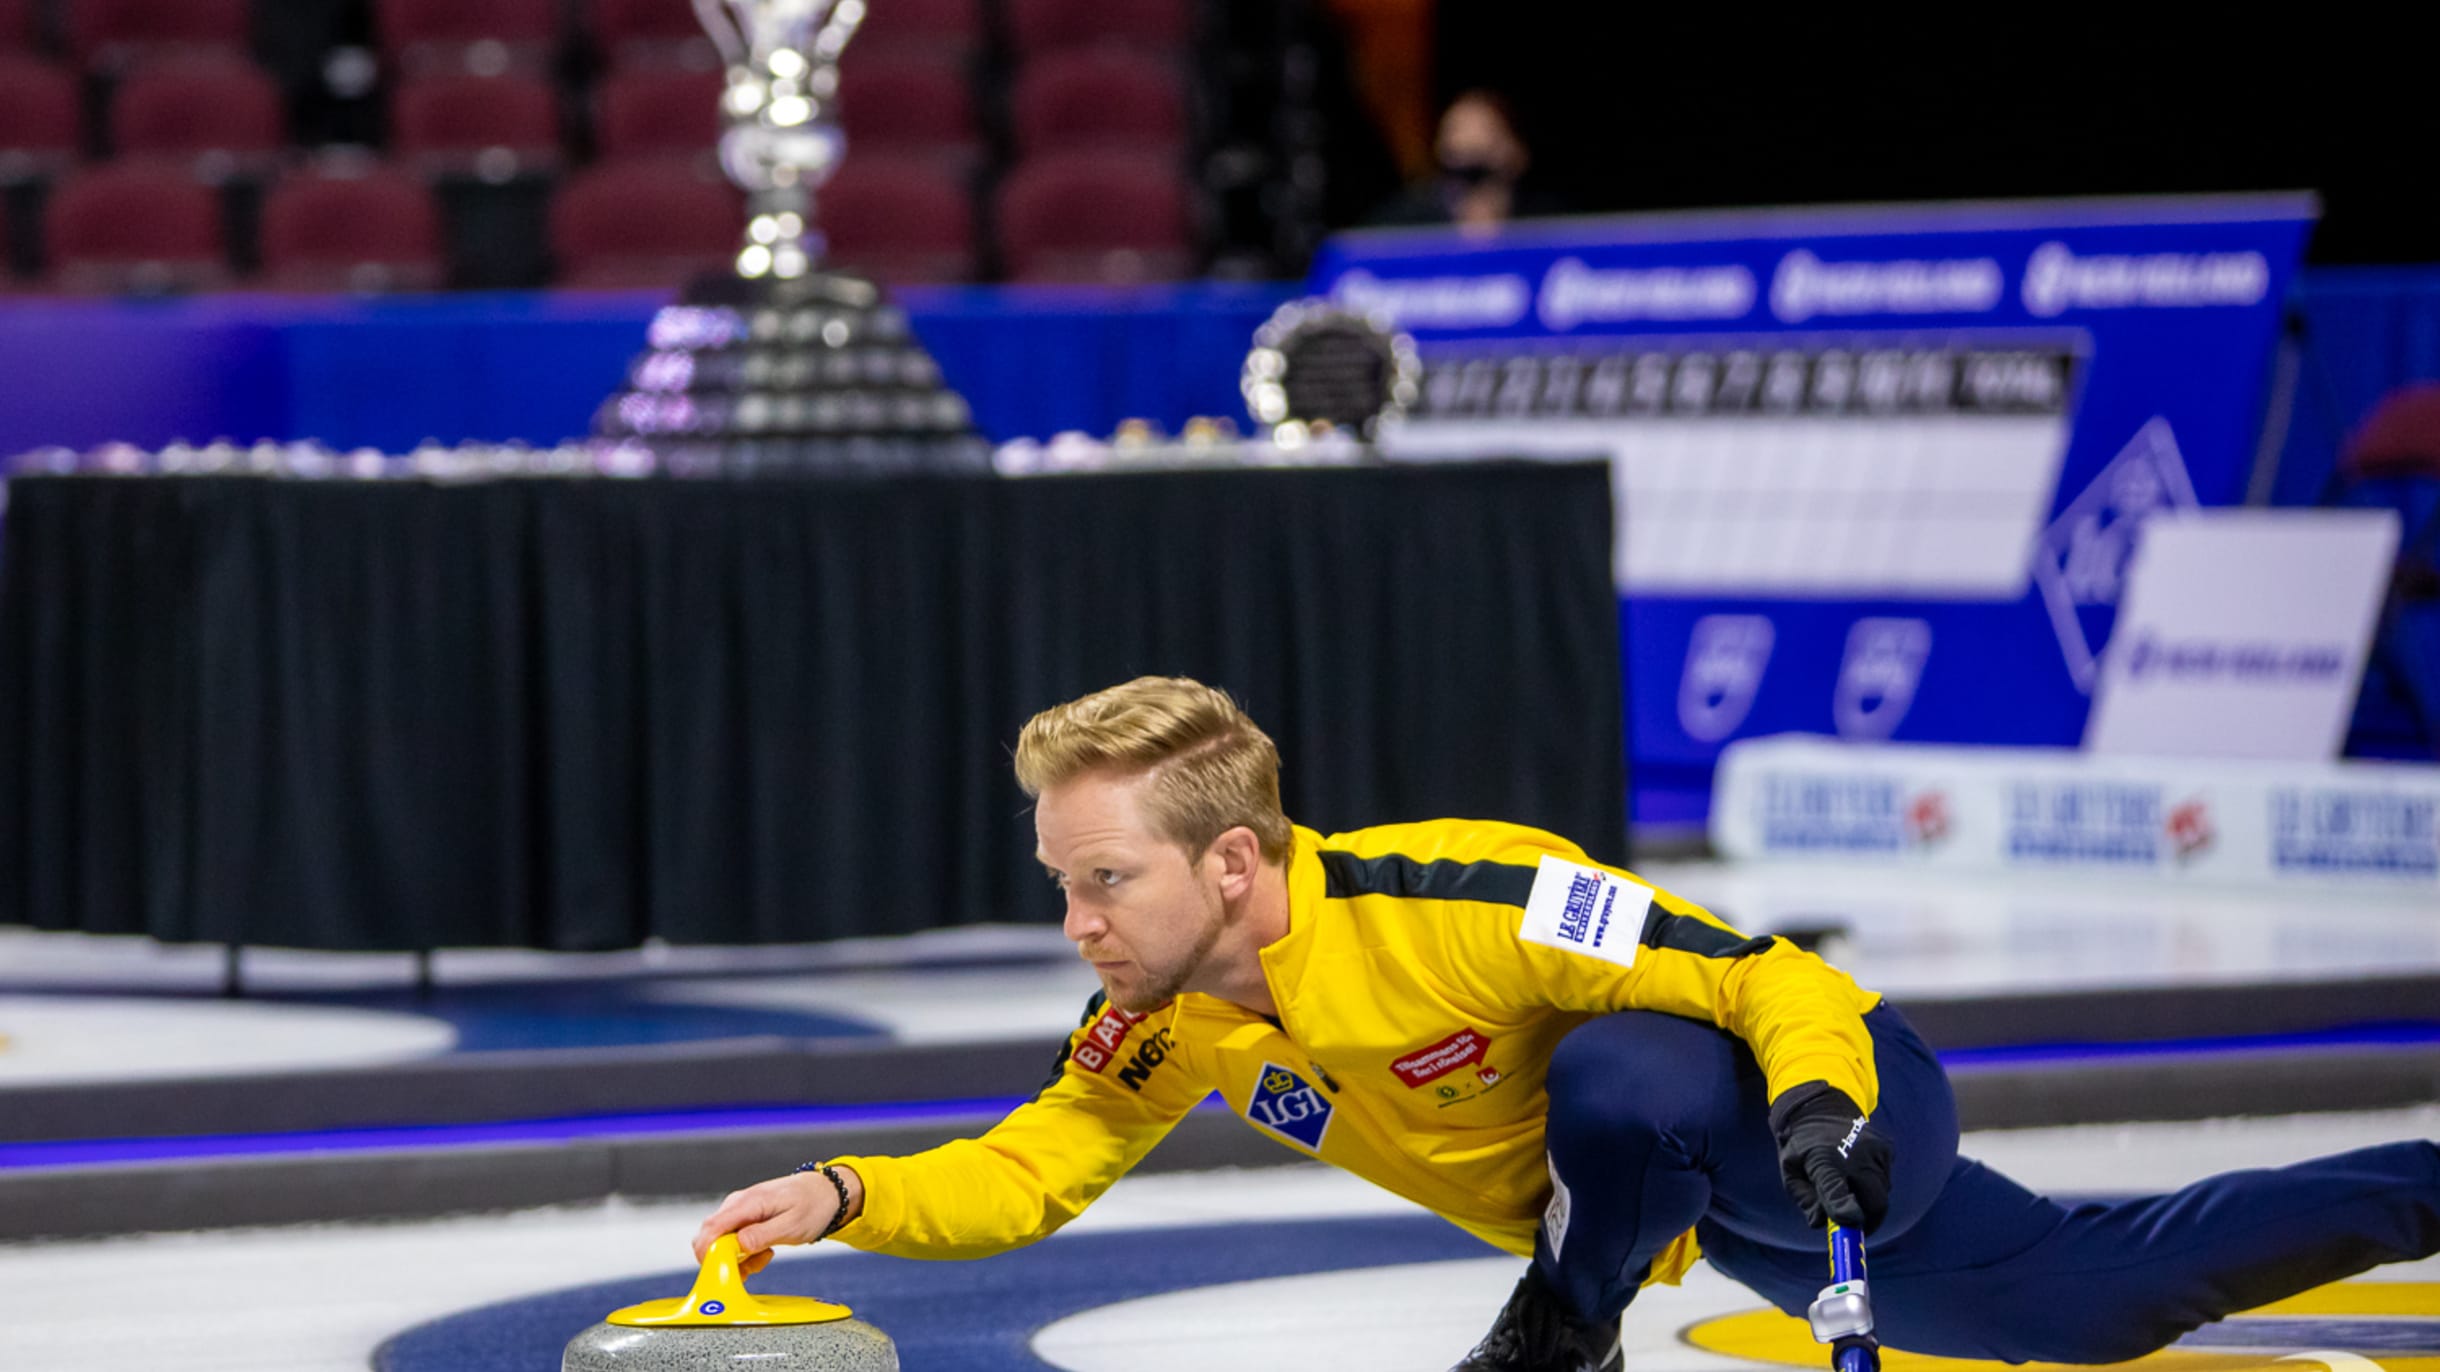 watch world curling live